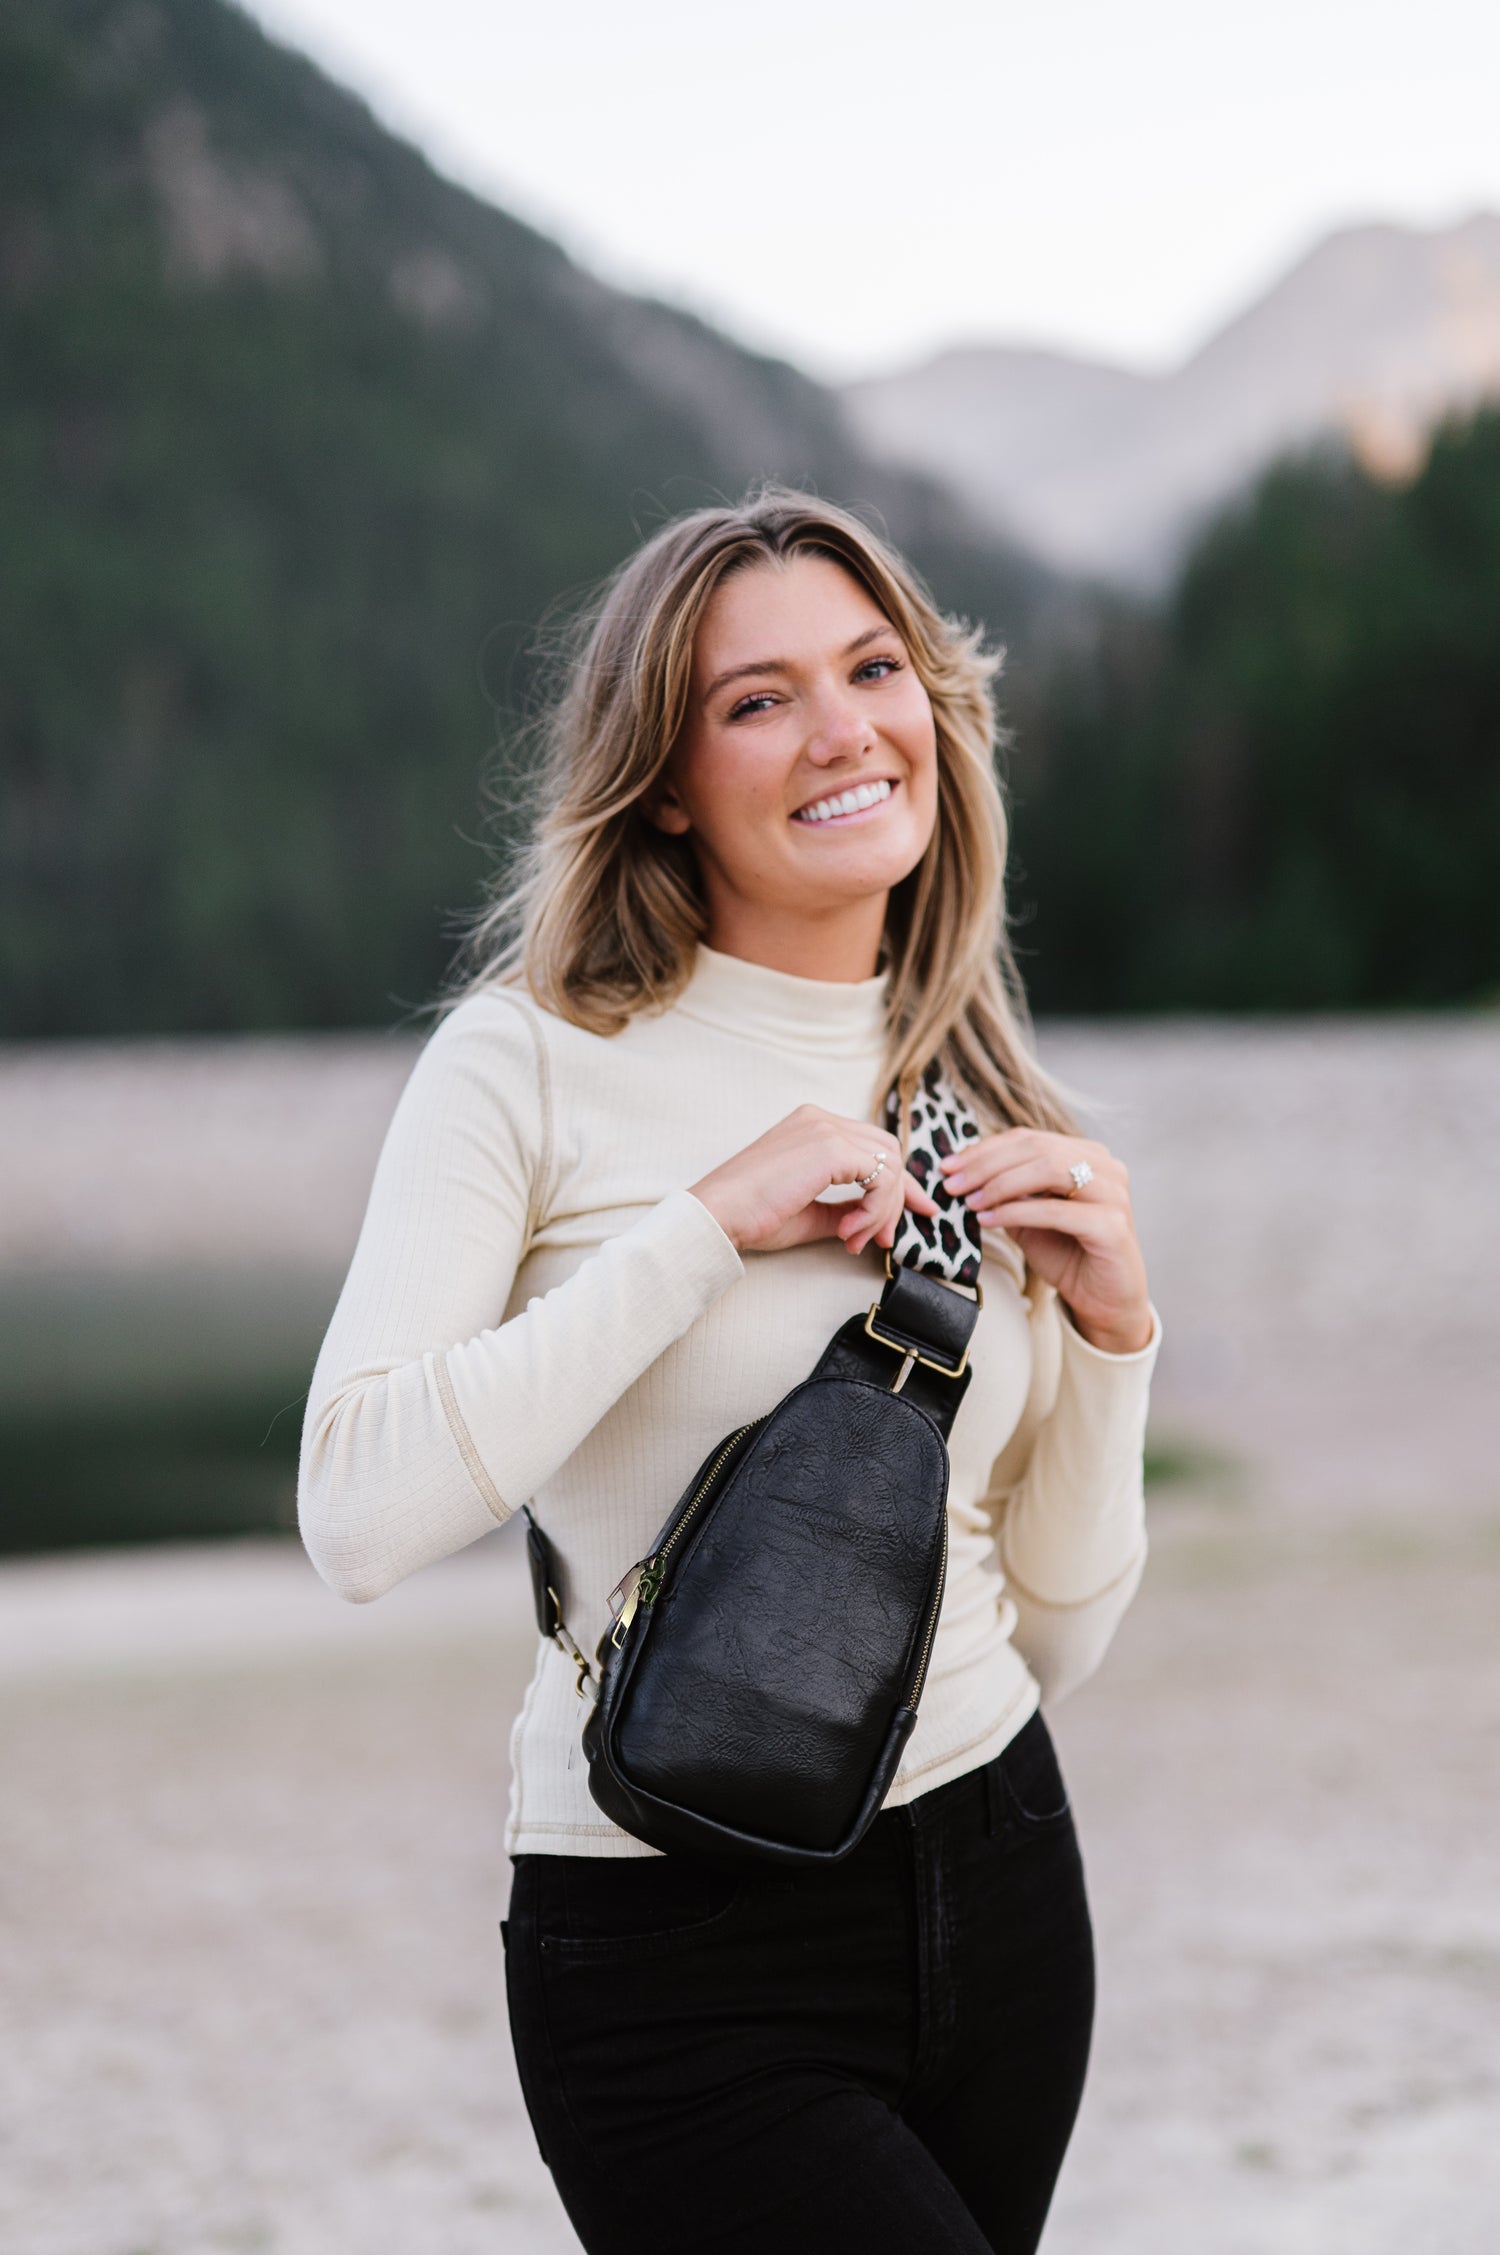 The Classy Cloth WS Sarah Shoulder Sling Bag - Black Leopard RTS available at The Good Life Boutique